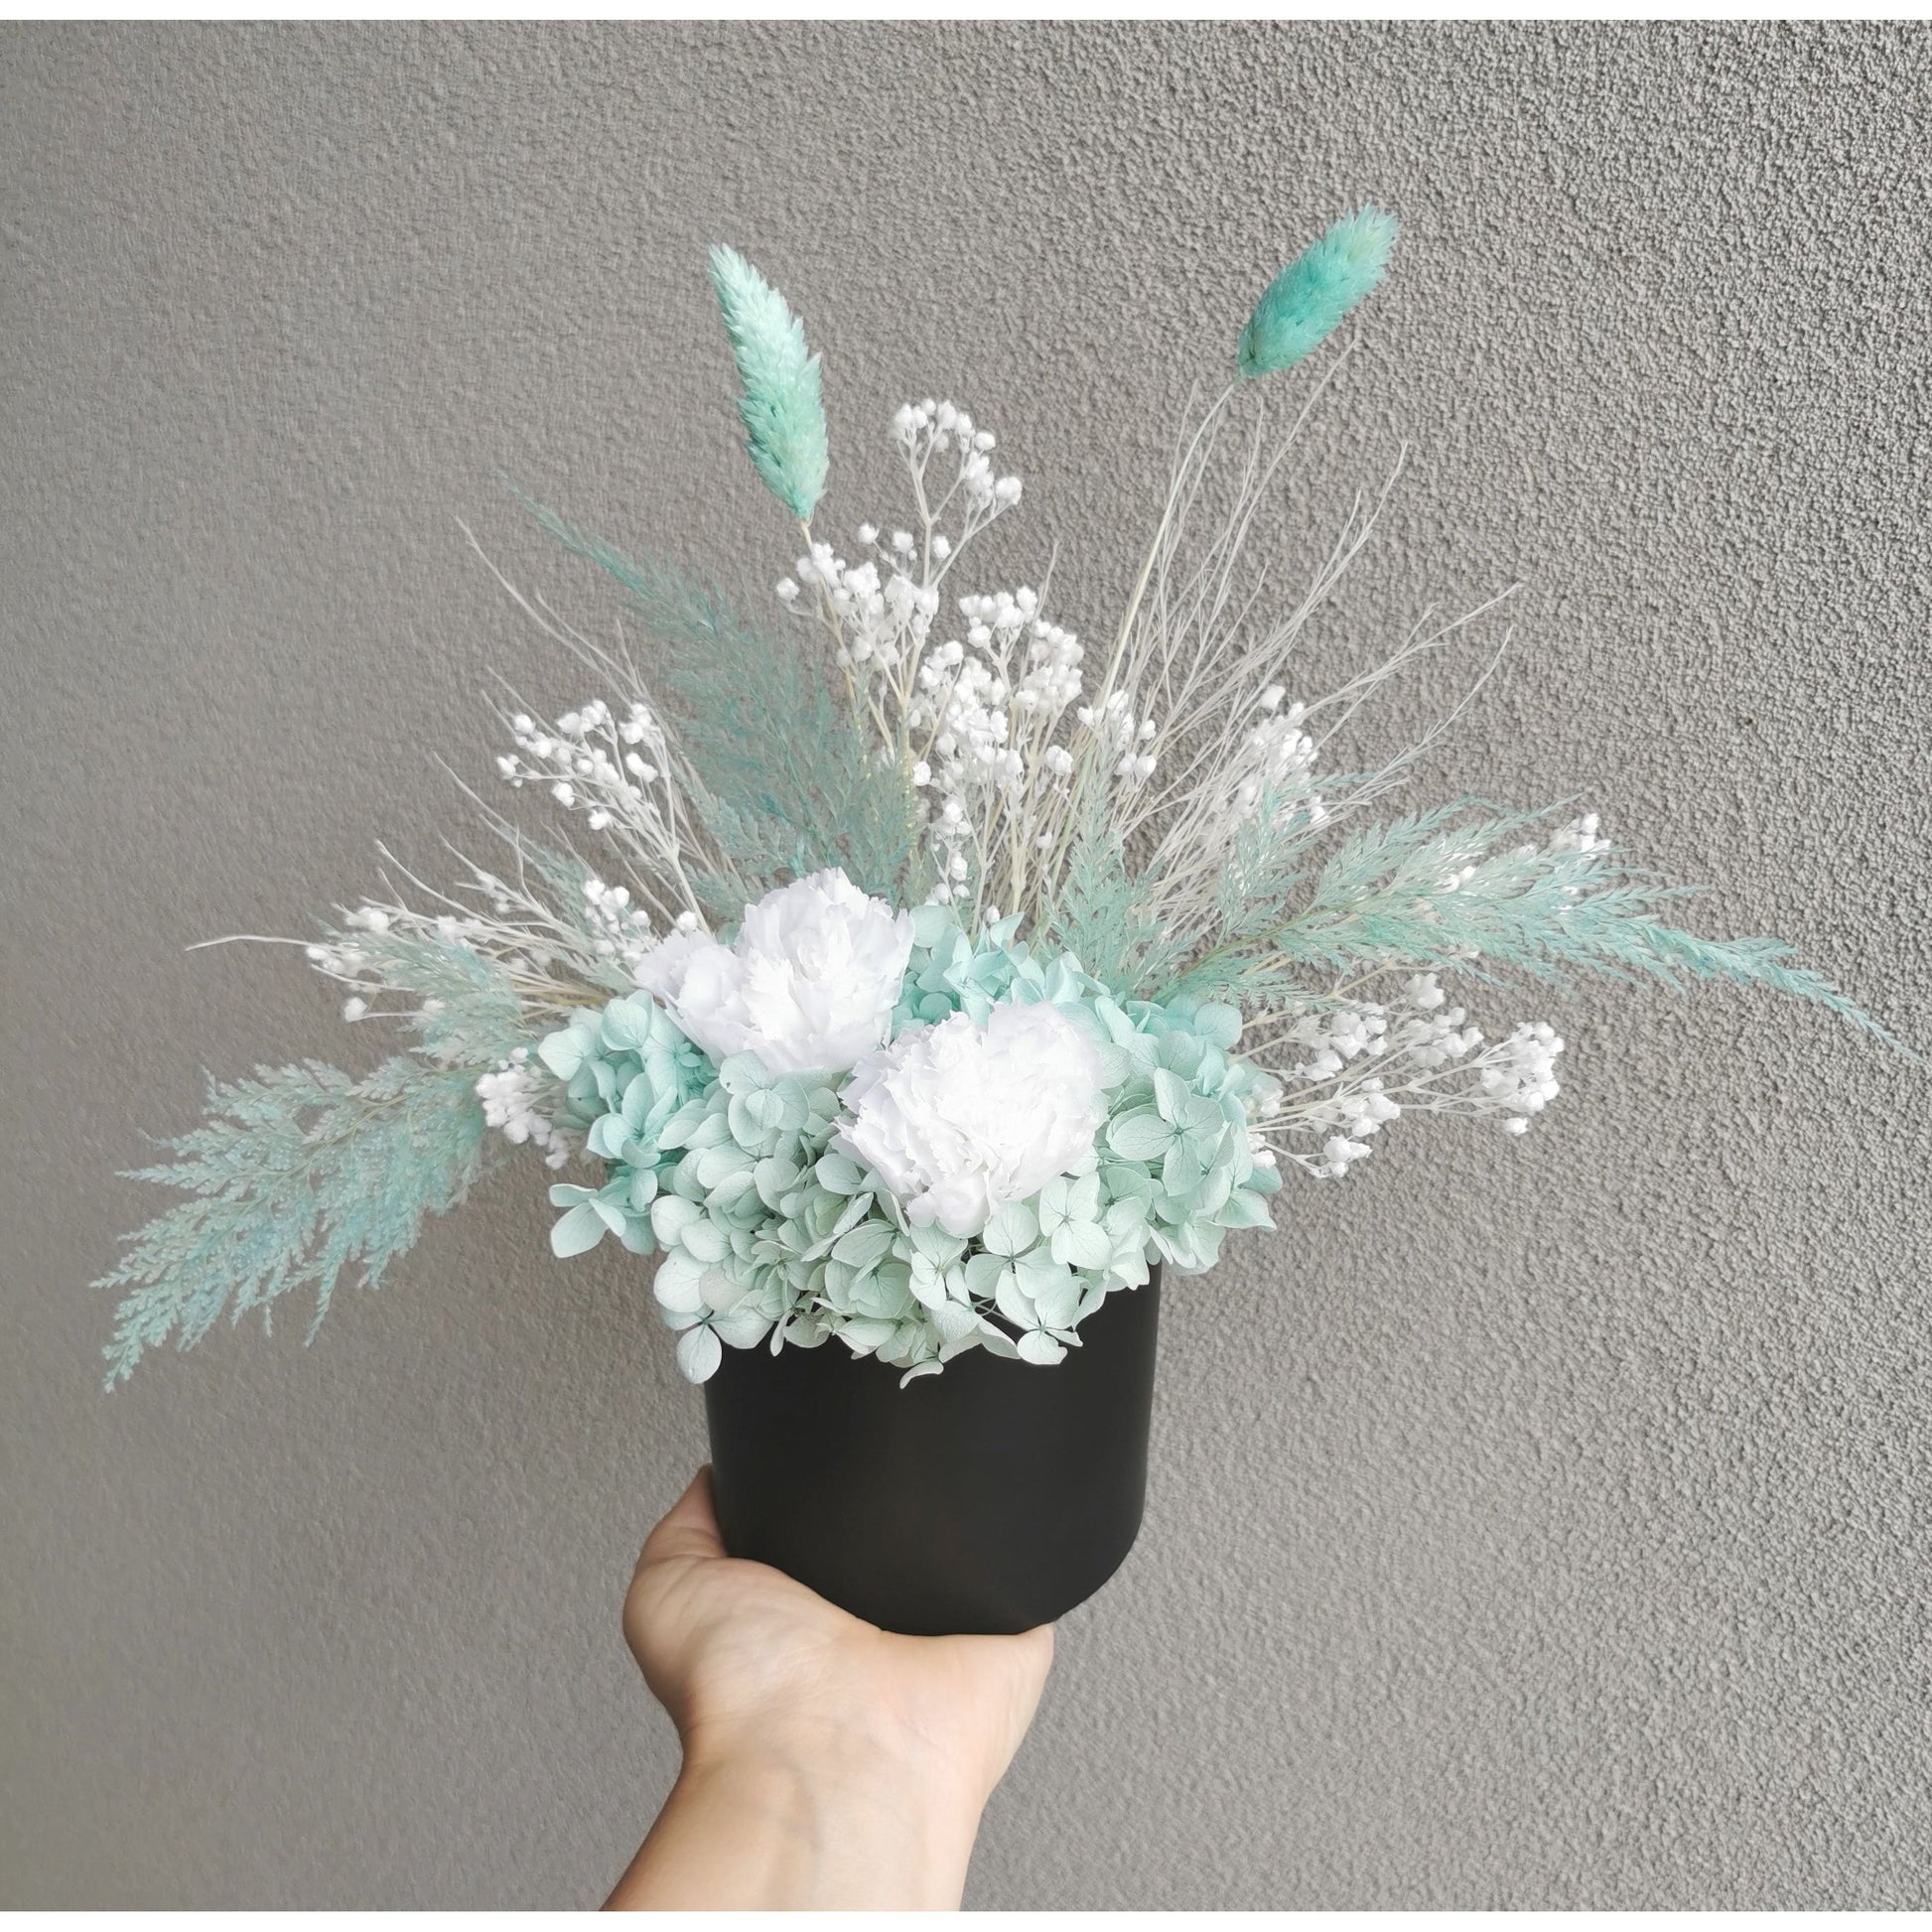 Dried & Preserved flower arrangement in Tiffany Blue & White colours and set in to a black pot. Photo shows arrangement being held by hand against a blank wall